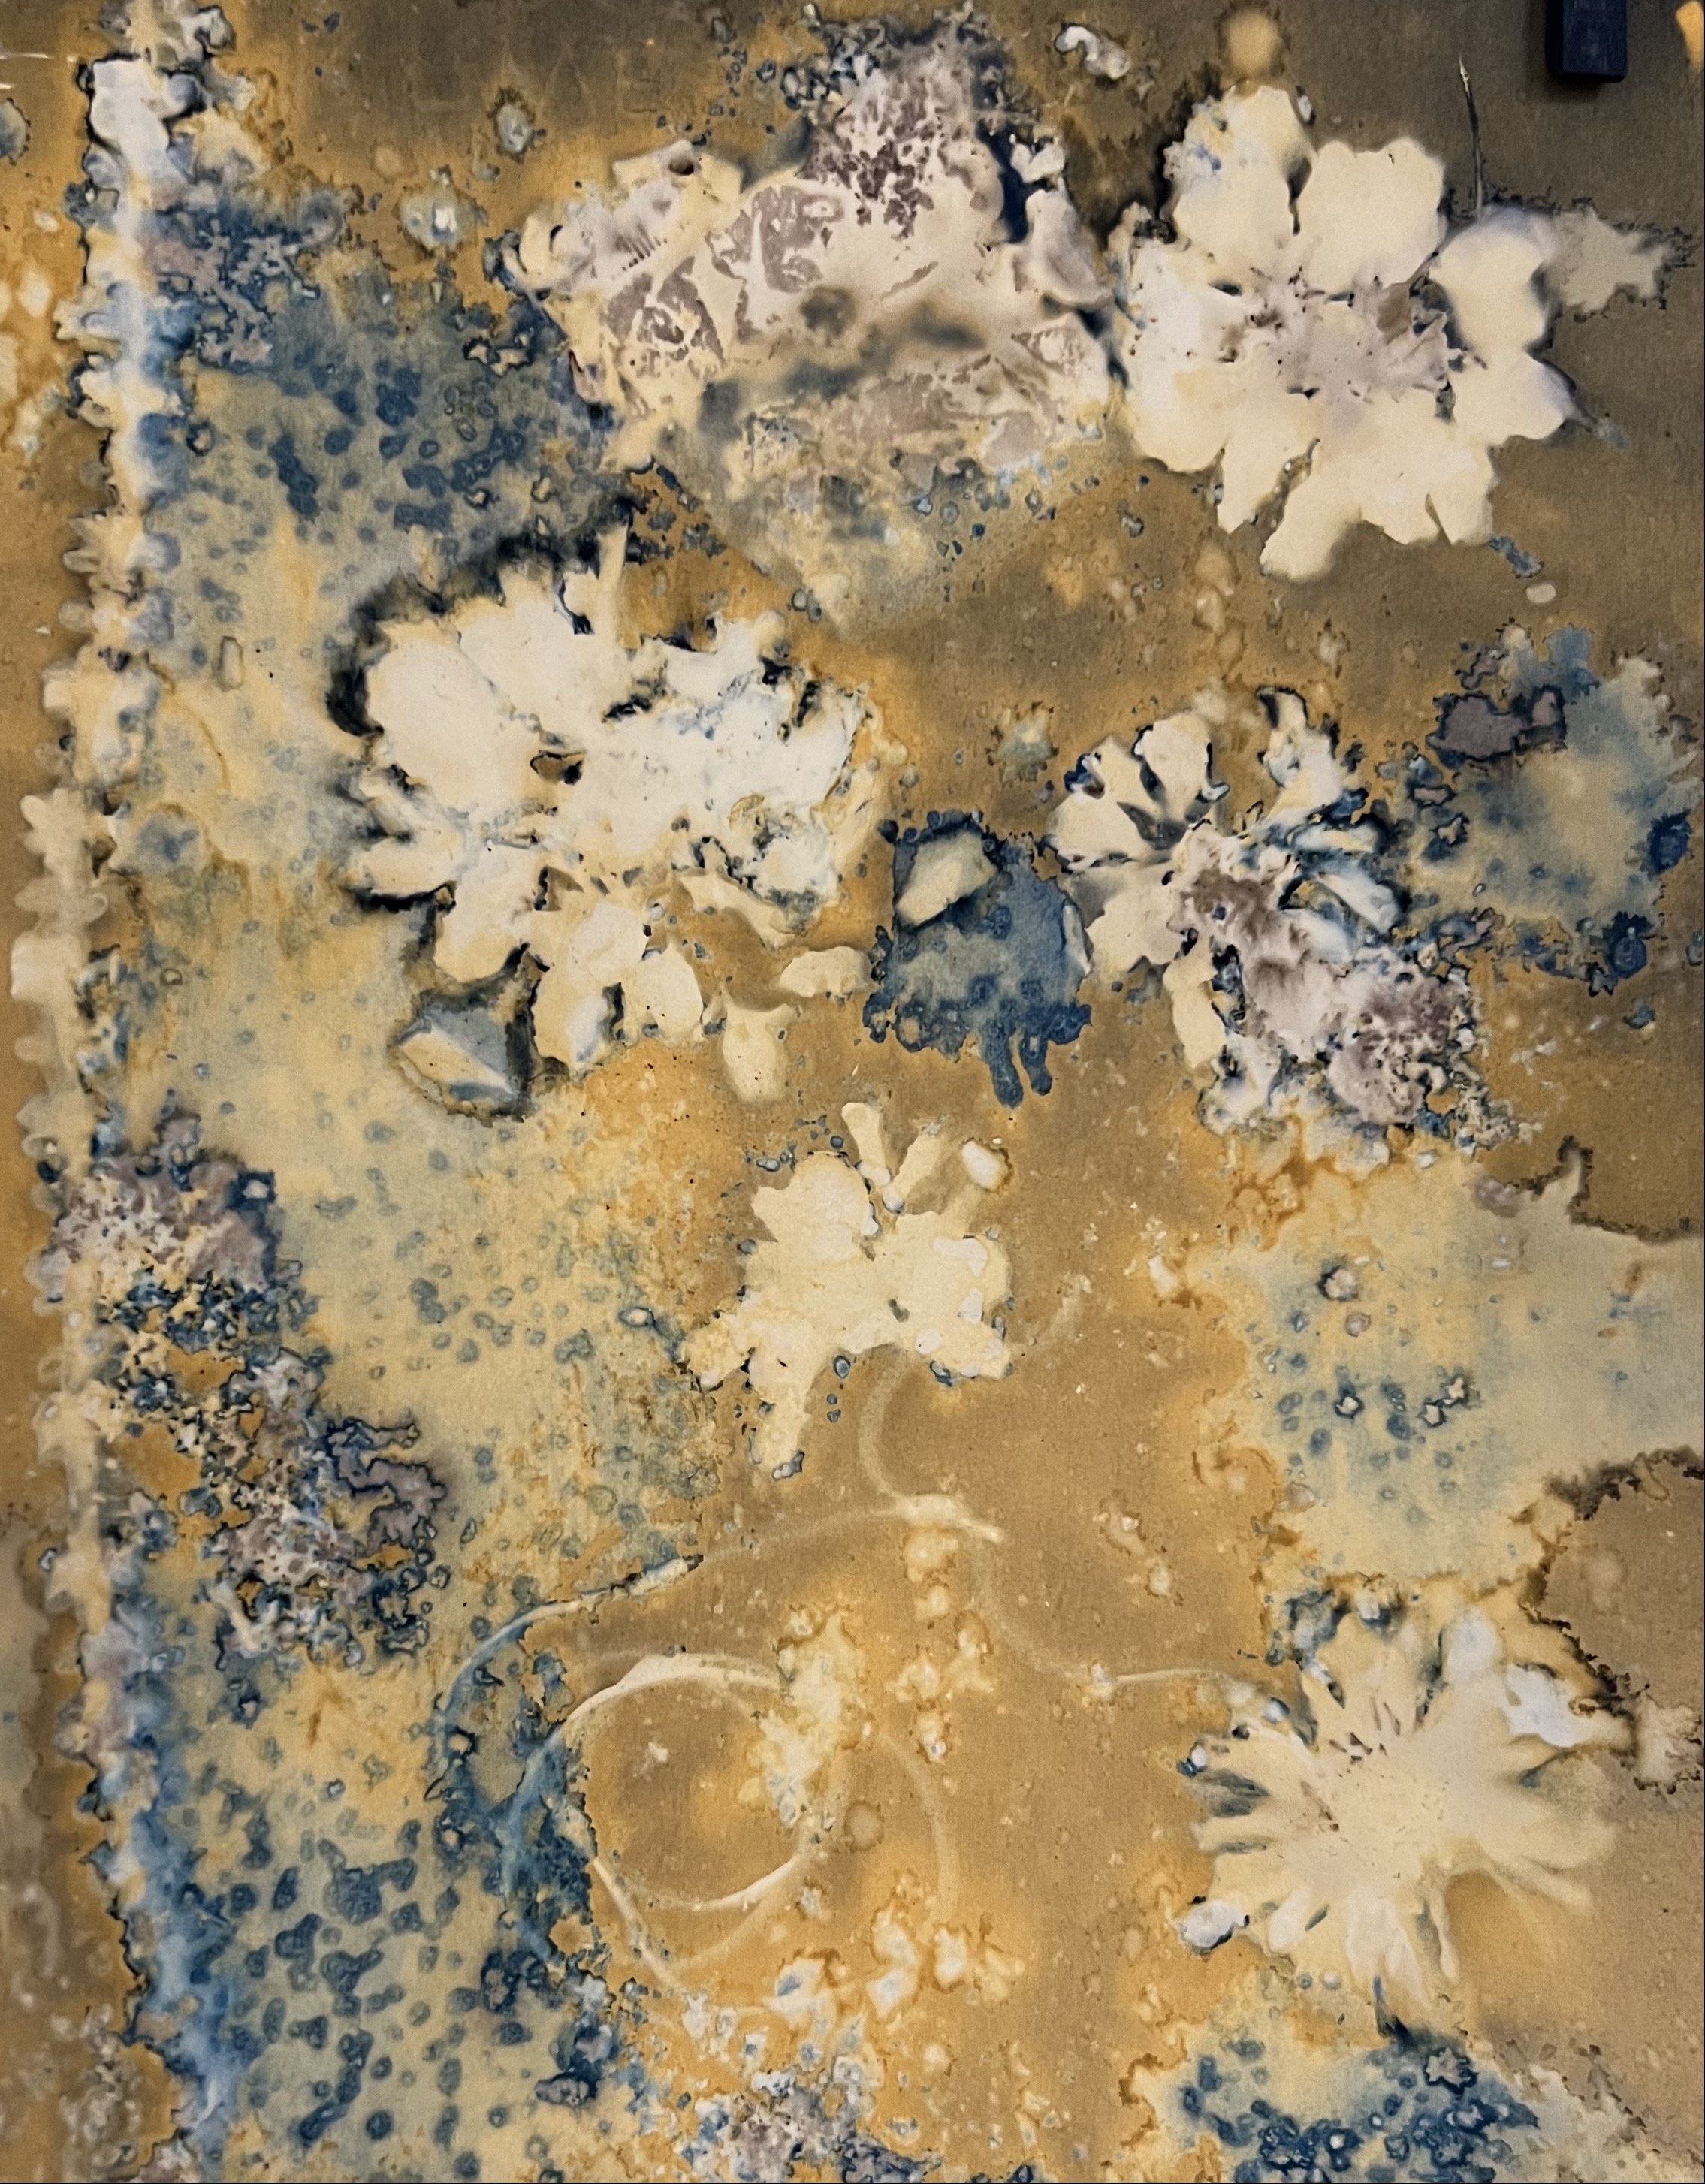 WET CYANOTYPE with Suzanne Mosley